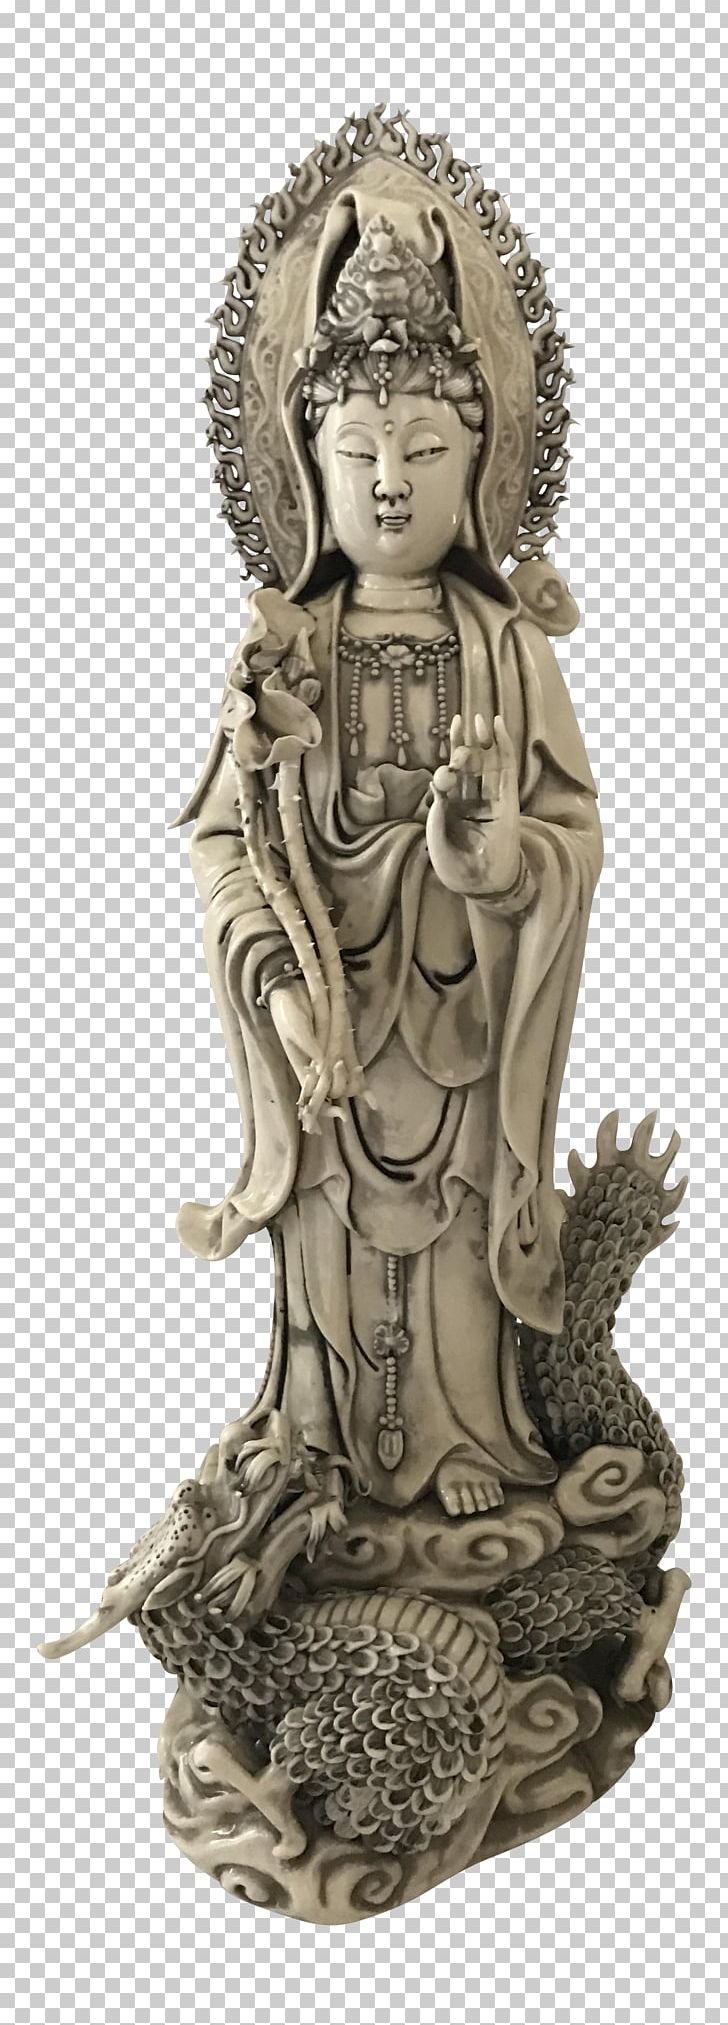 Statue Classical Sculpture Figurine PNG, Clipart, Blanc, Bronze, Chine, Classical Sculpture, Figurine Free PNG Download